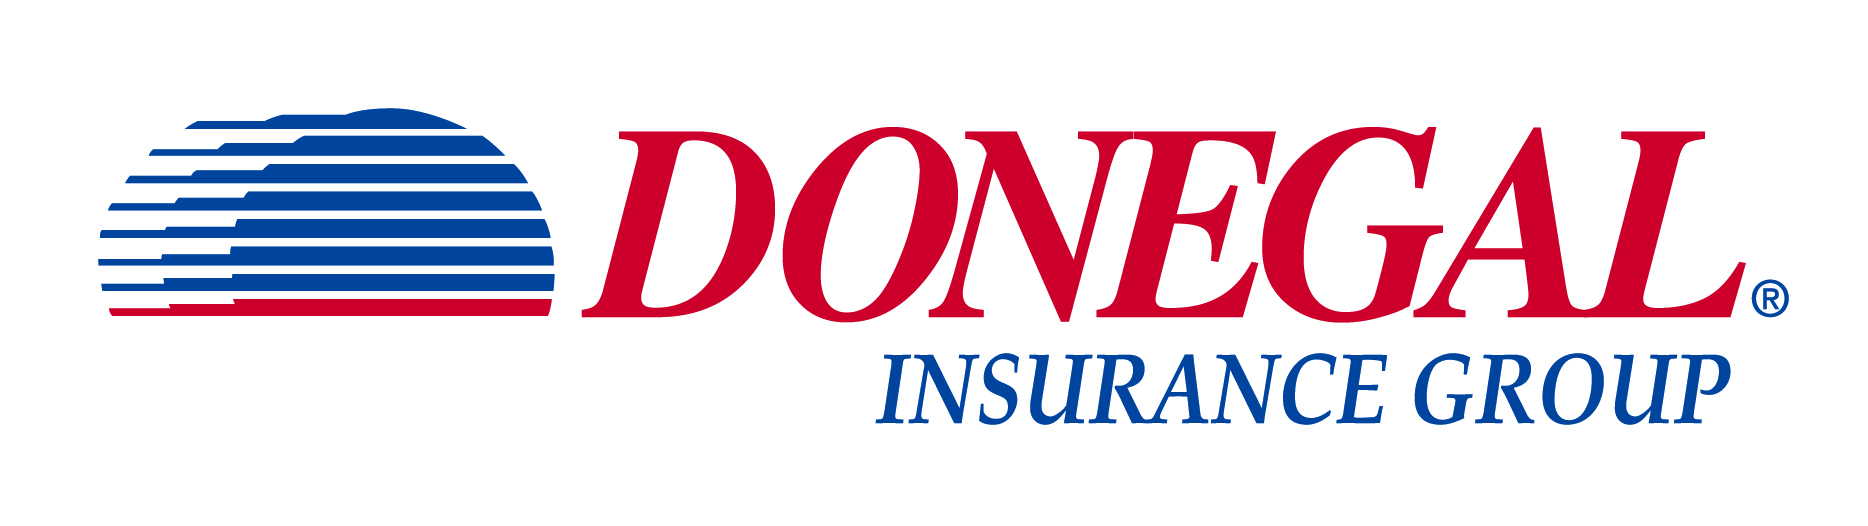 Donegal Insurance Group | Spreng-Smith Insurance Agency